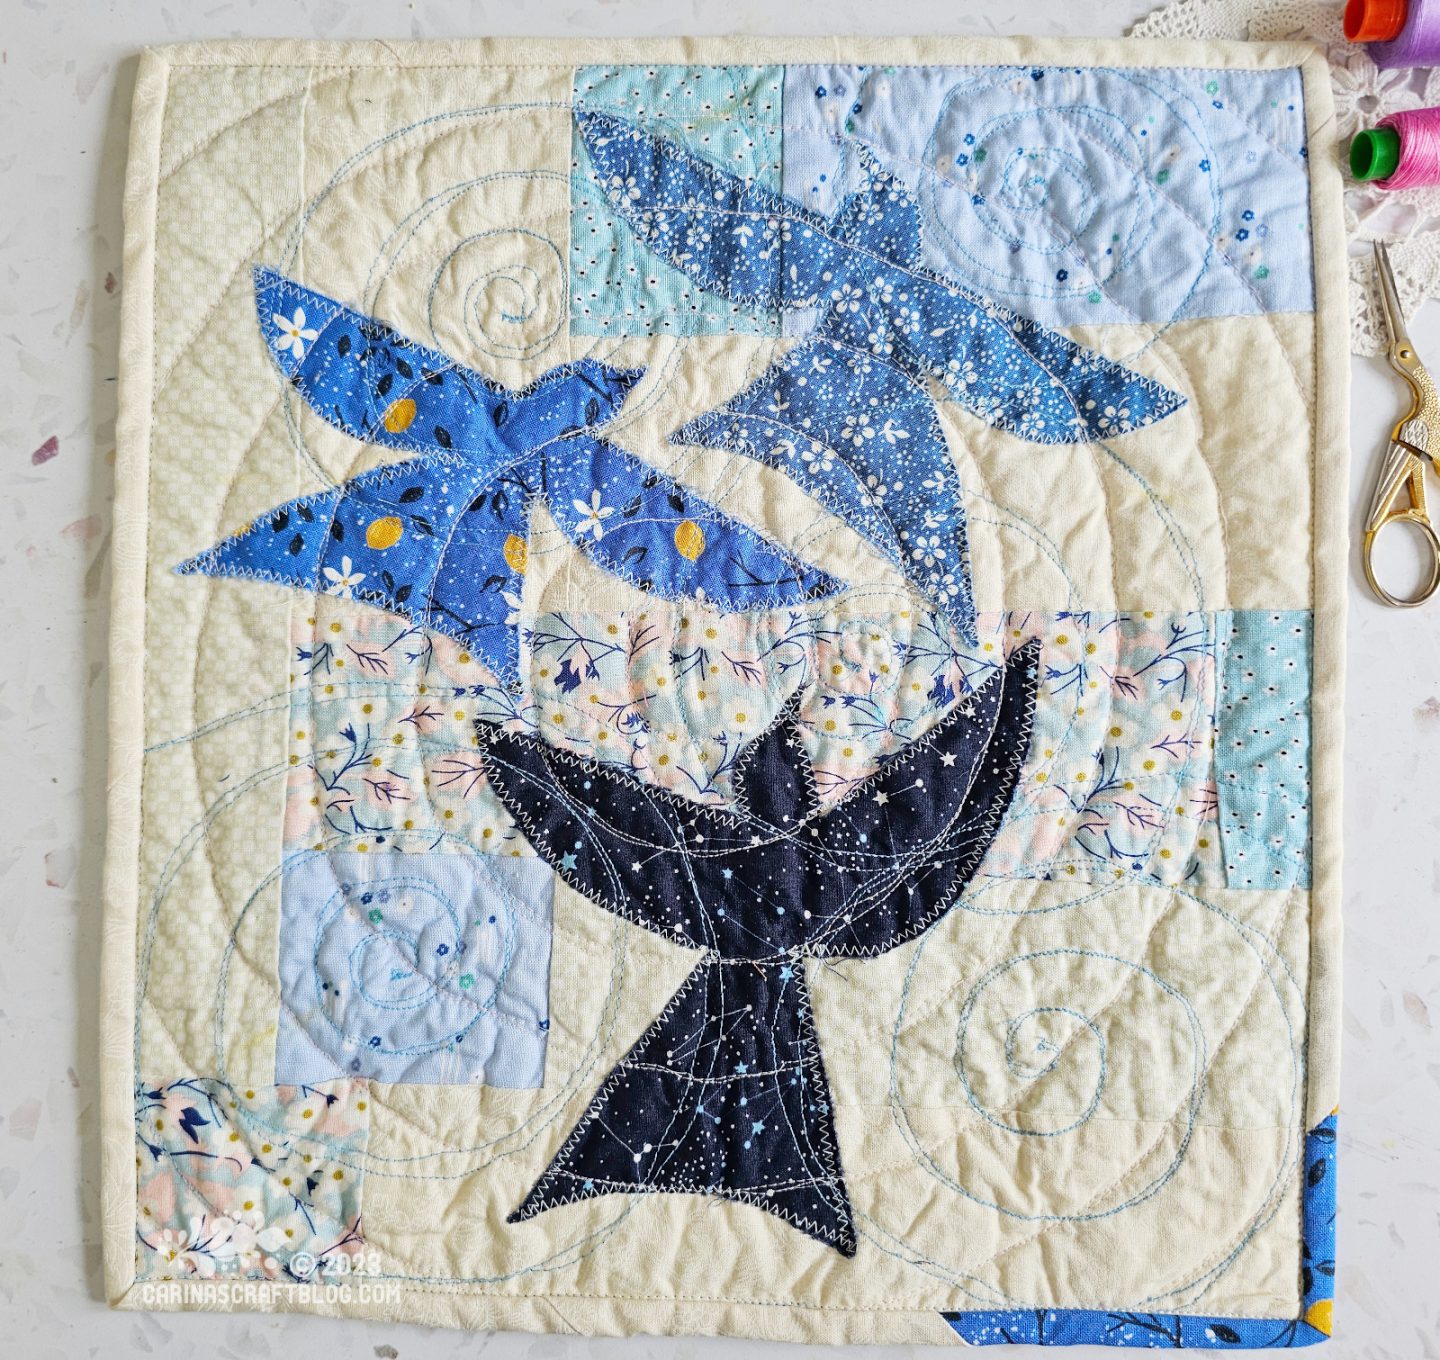 View from above of a mini quilt. The background is a random patchwork in white and light blue with three birds in different shades of blue appliquéd on top.